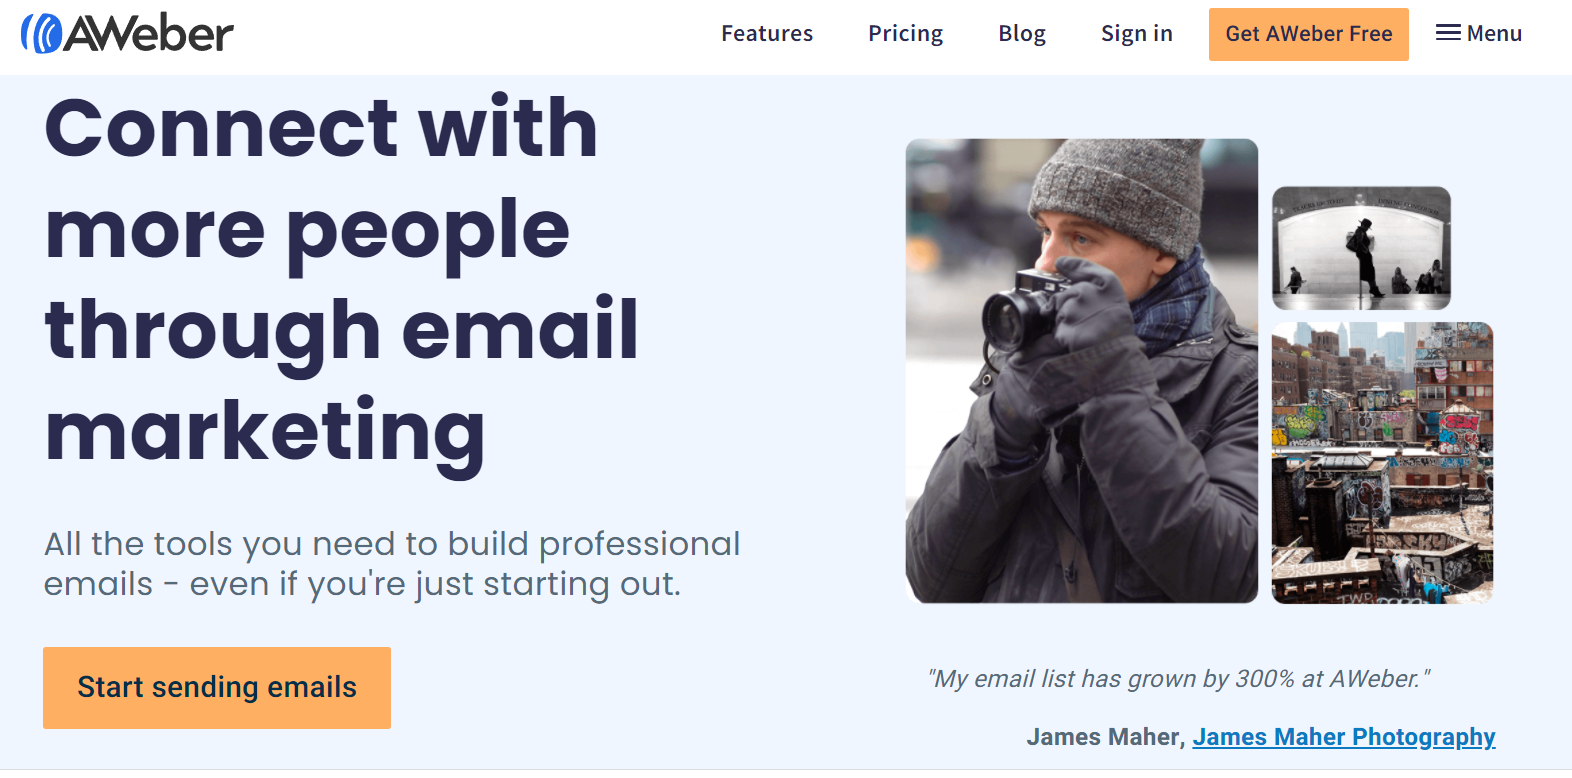 aweber features- E-Mail Marketing For Newbies